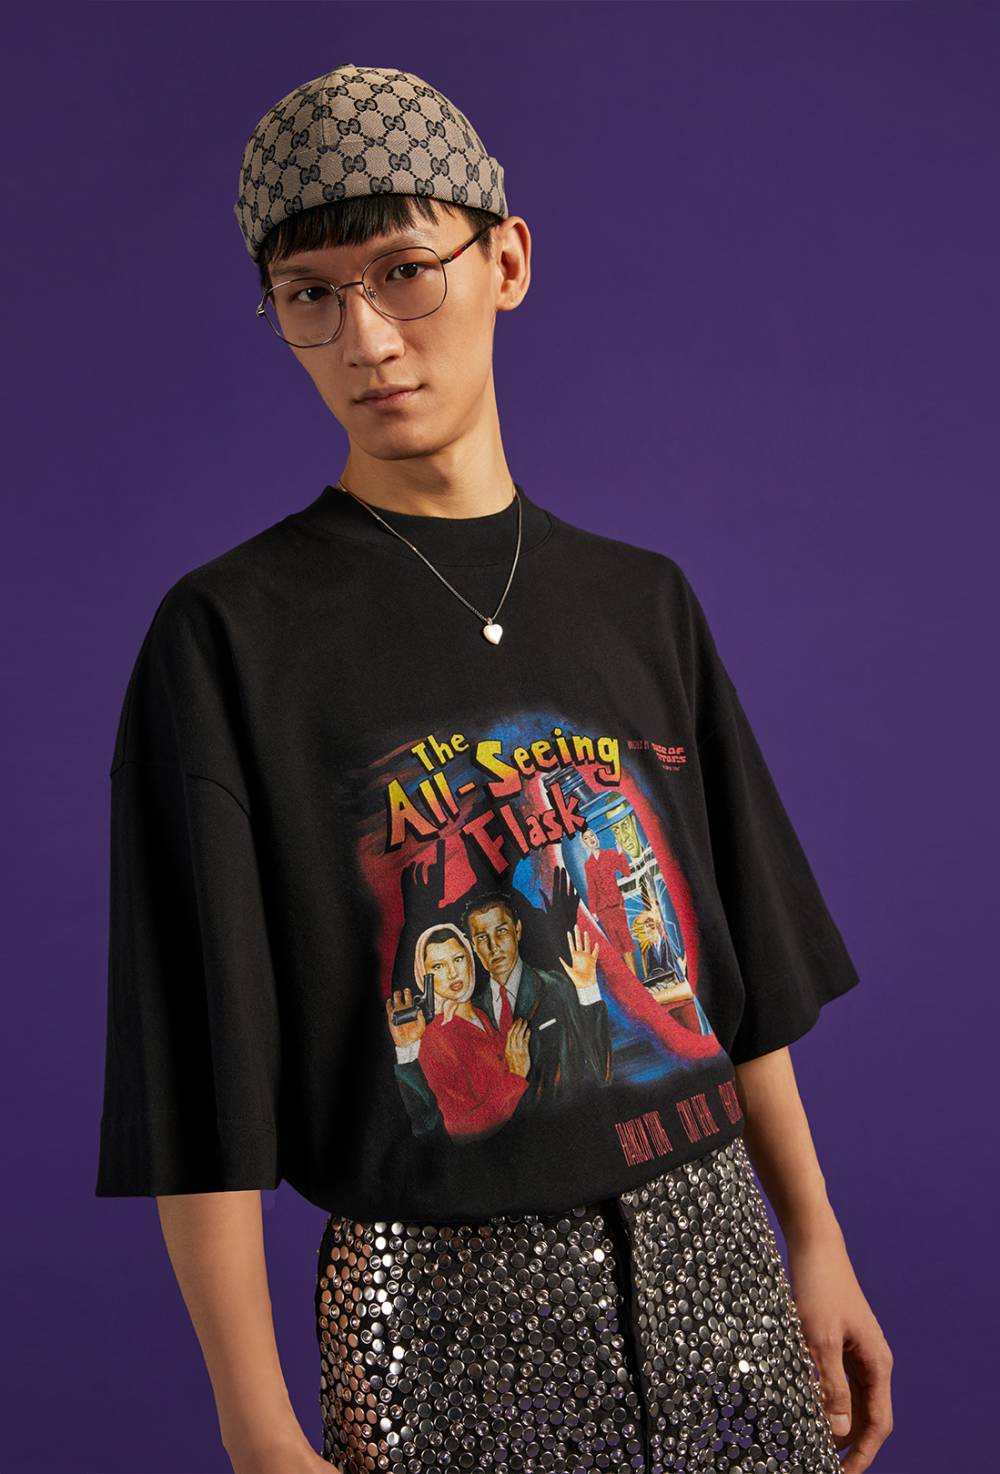 Boxy printed t-shirt by House of Errors image #3